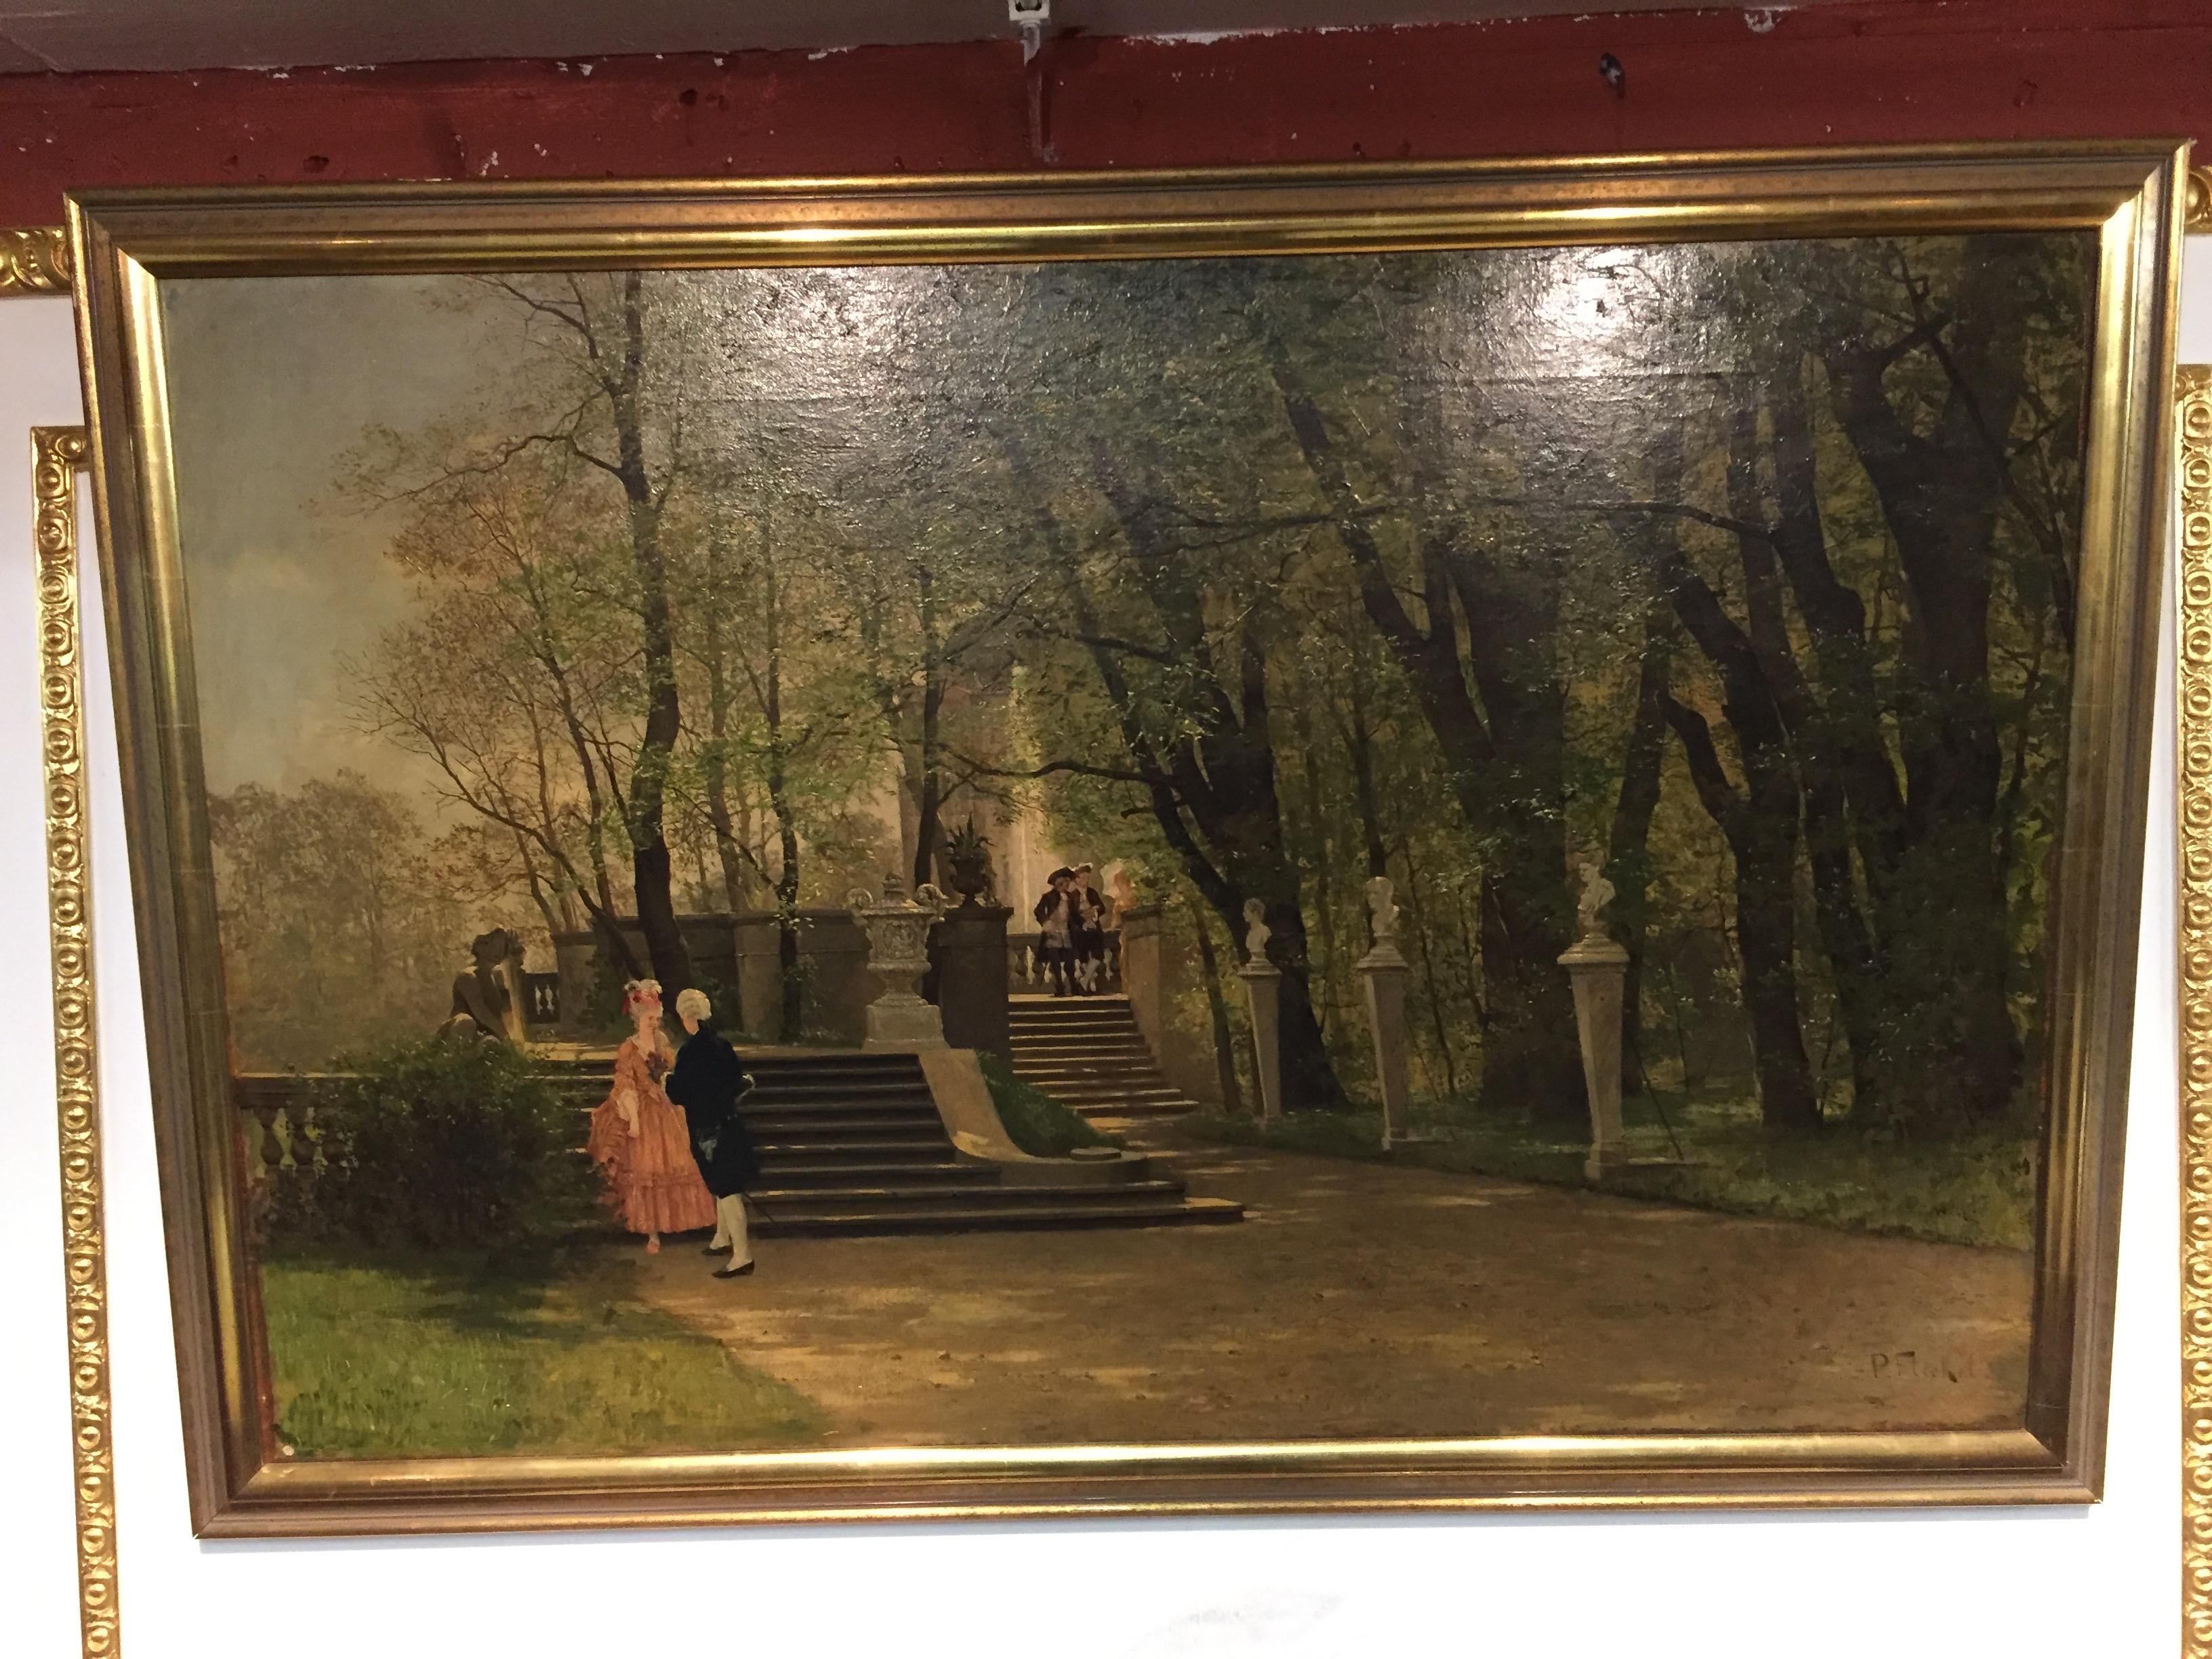 Oil painting by P. F. Flickel in the castle garden oil on canvas painted painting. Representation of an opposing, gallant Rococo pair in front of the stairs of the castle garden. Two well-heeled gentlemen are also watching in the background. Signed